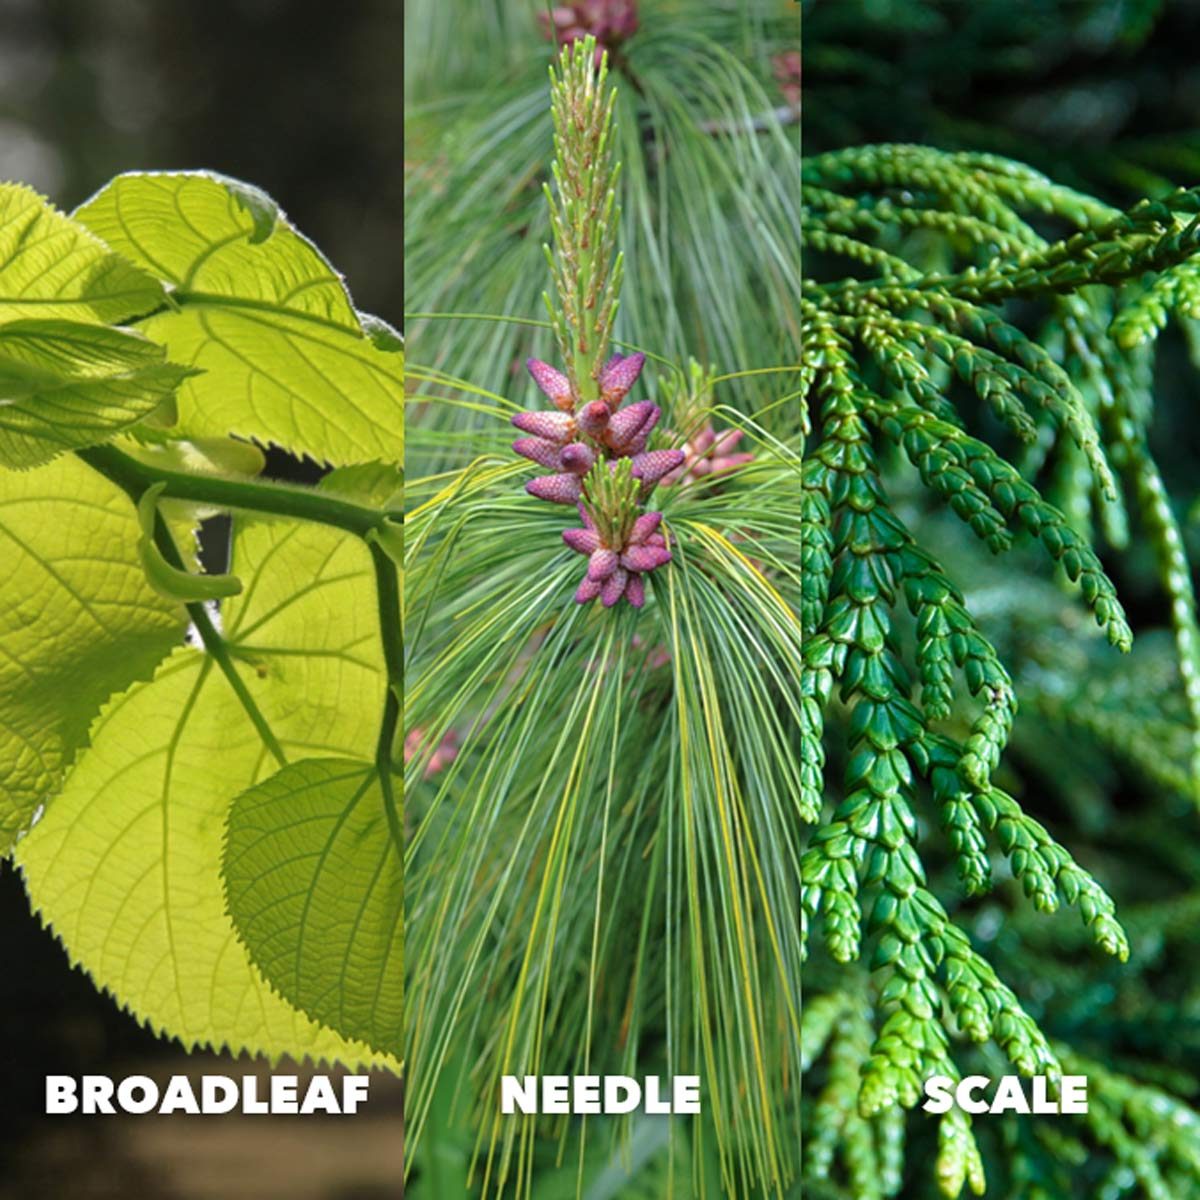 Tree Identification How To Identify Different Types Of Trees